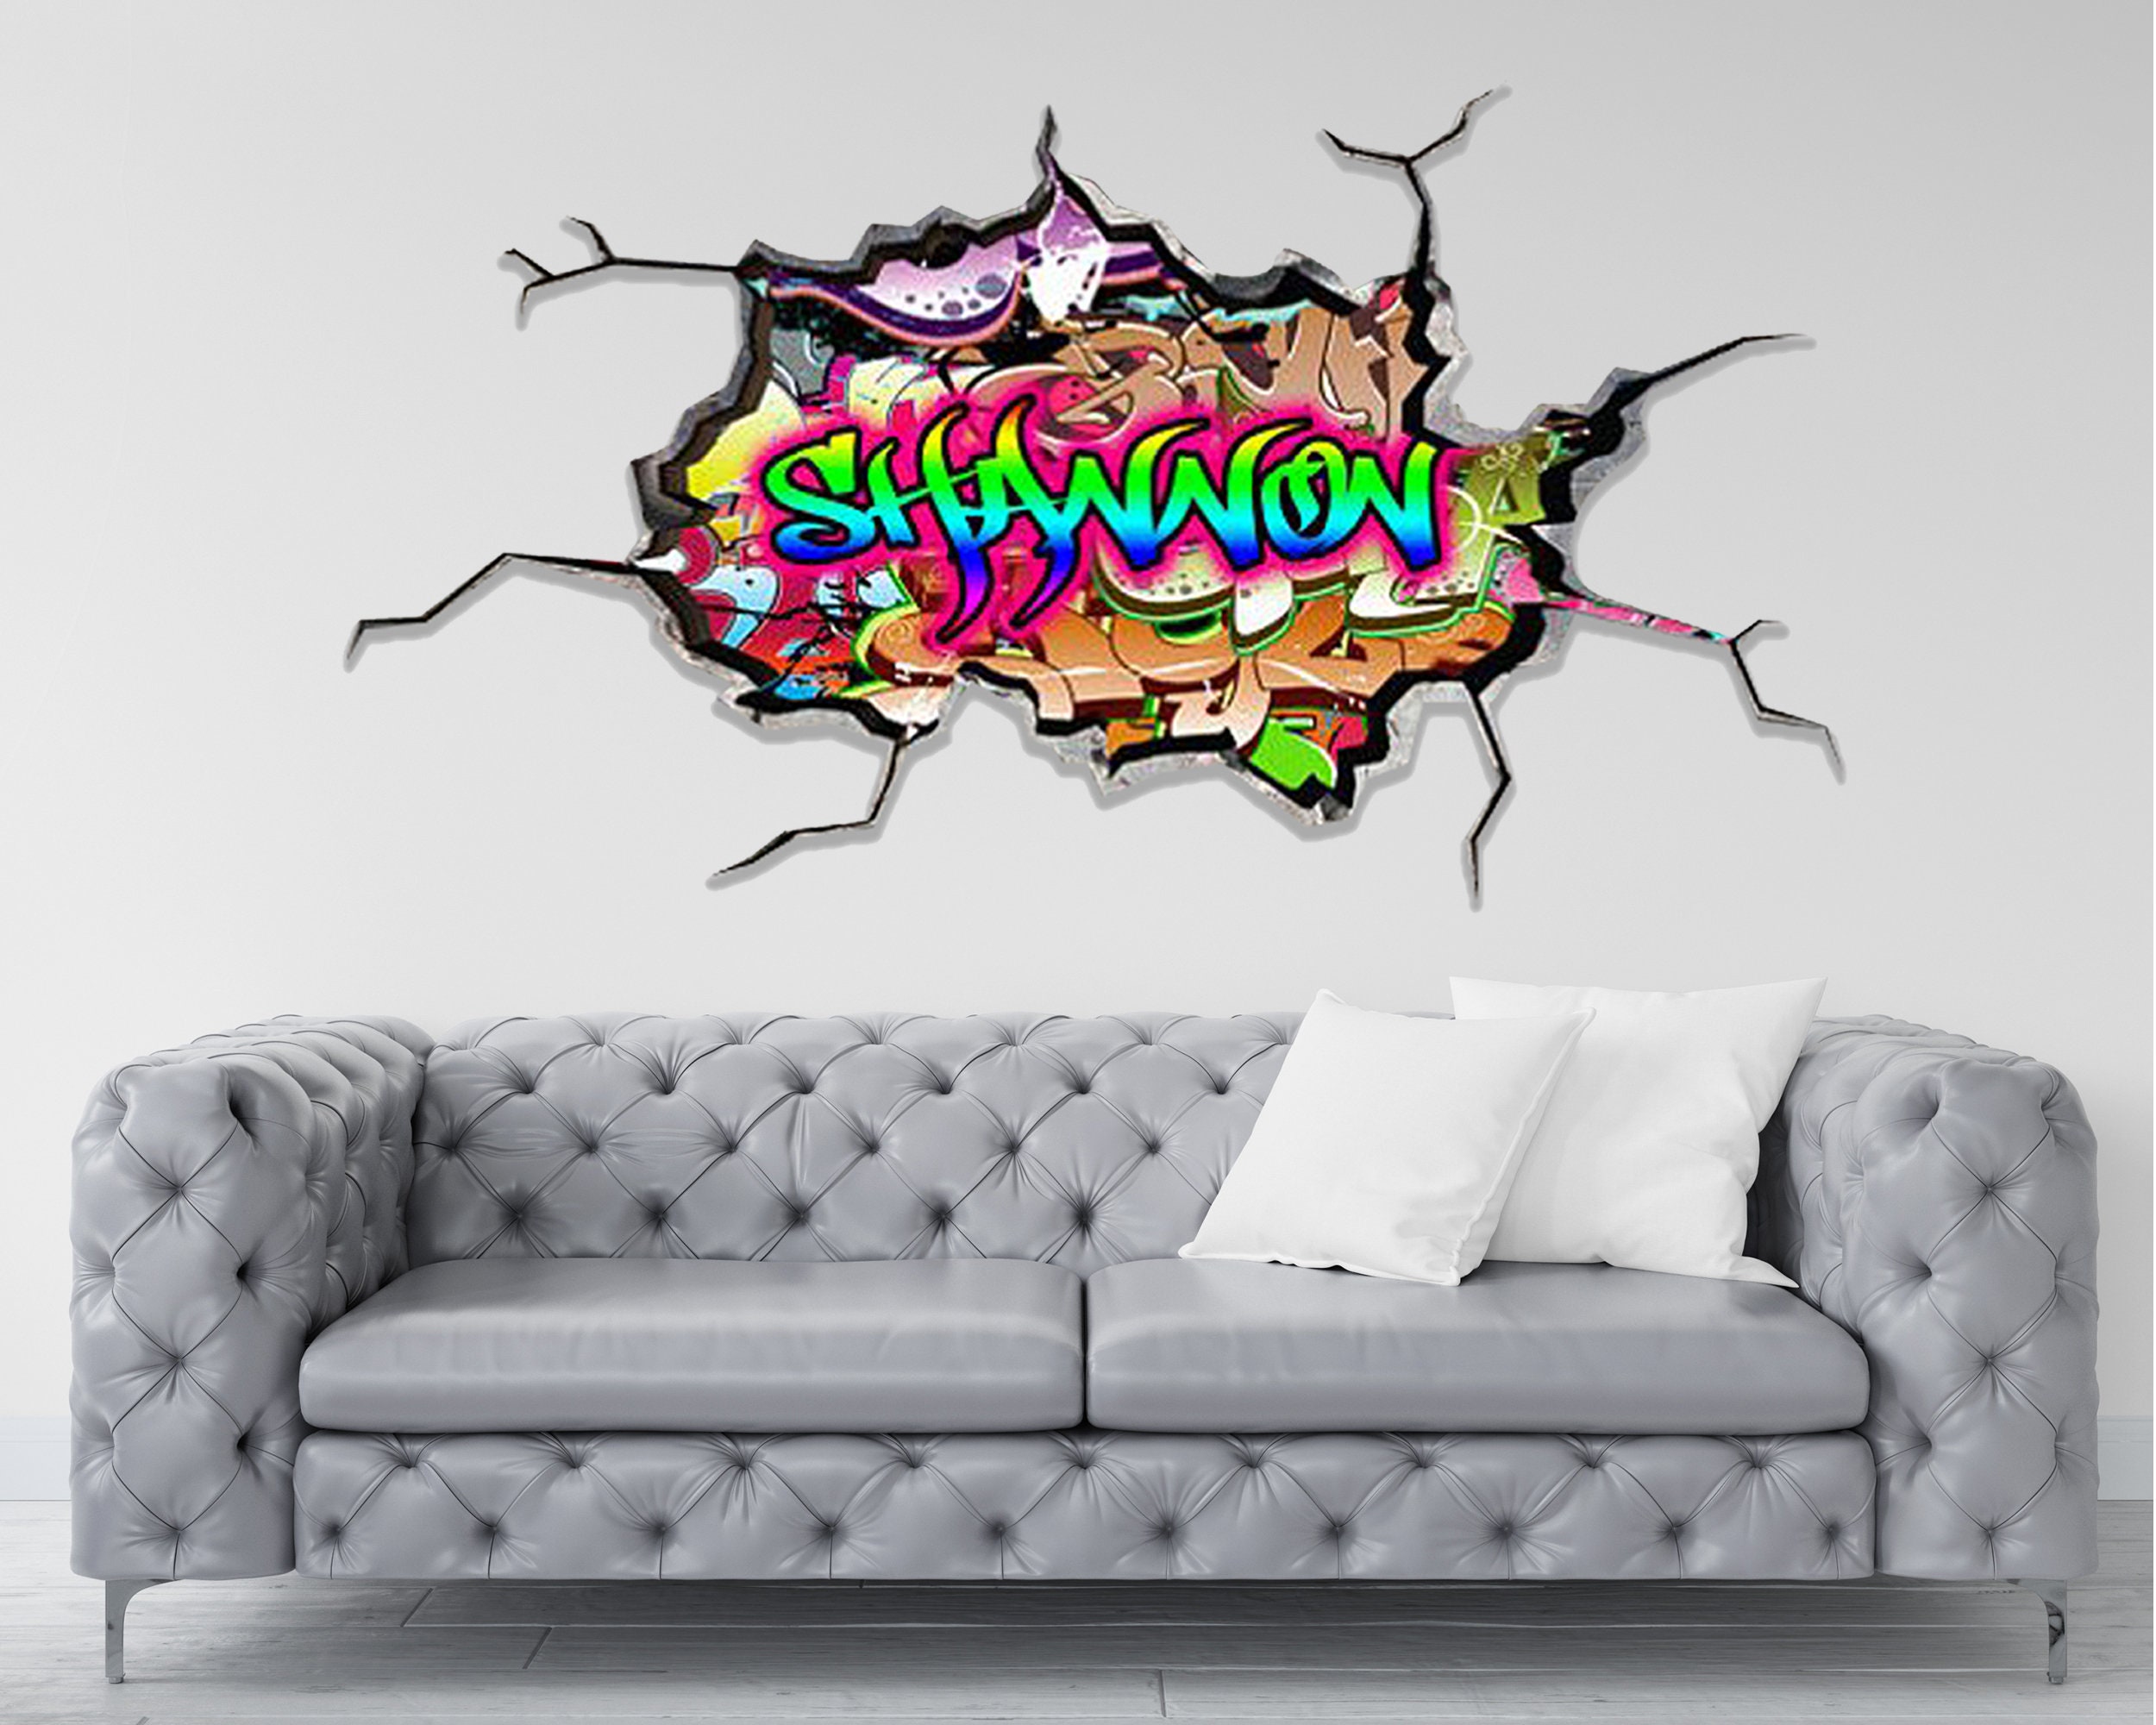 GRAFFITI WALL DECOR Personalized Name Decal, My Sticky Art, Gift for Kids,  Custom Name Wall Sticker, Unique Home Decor, Custom Art Gift 